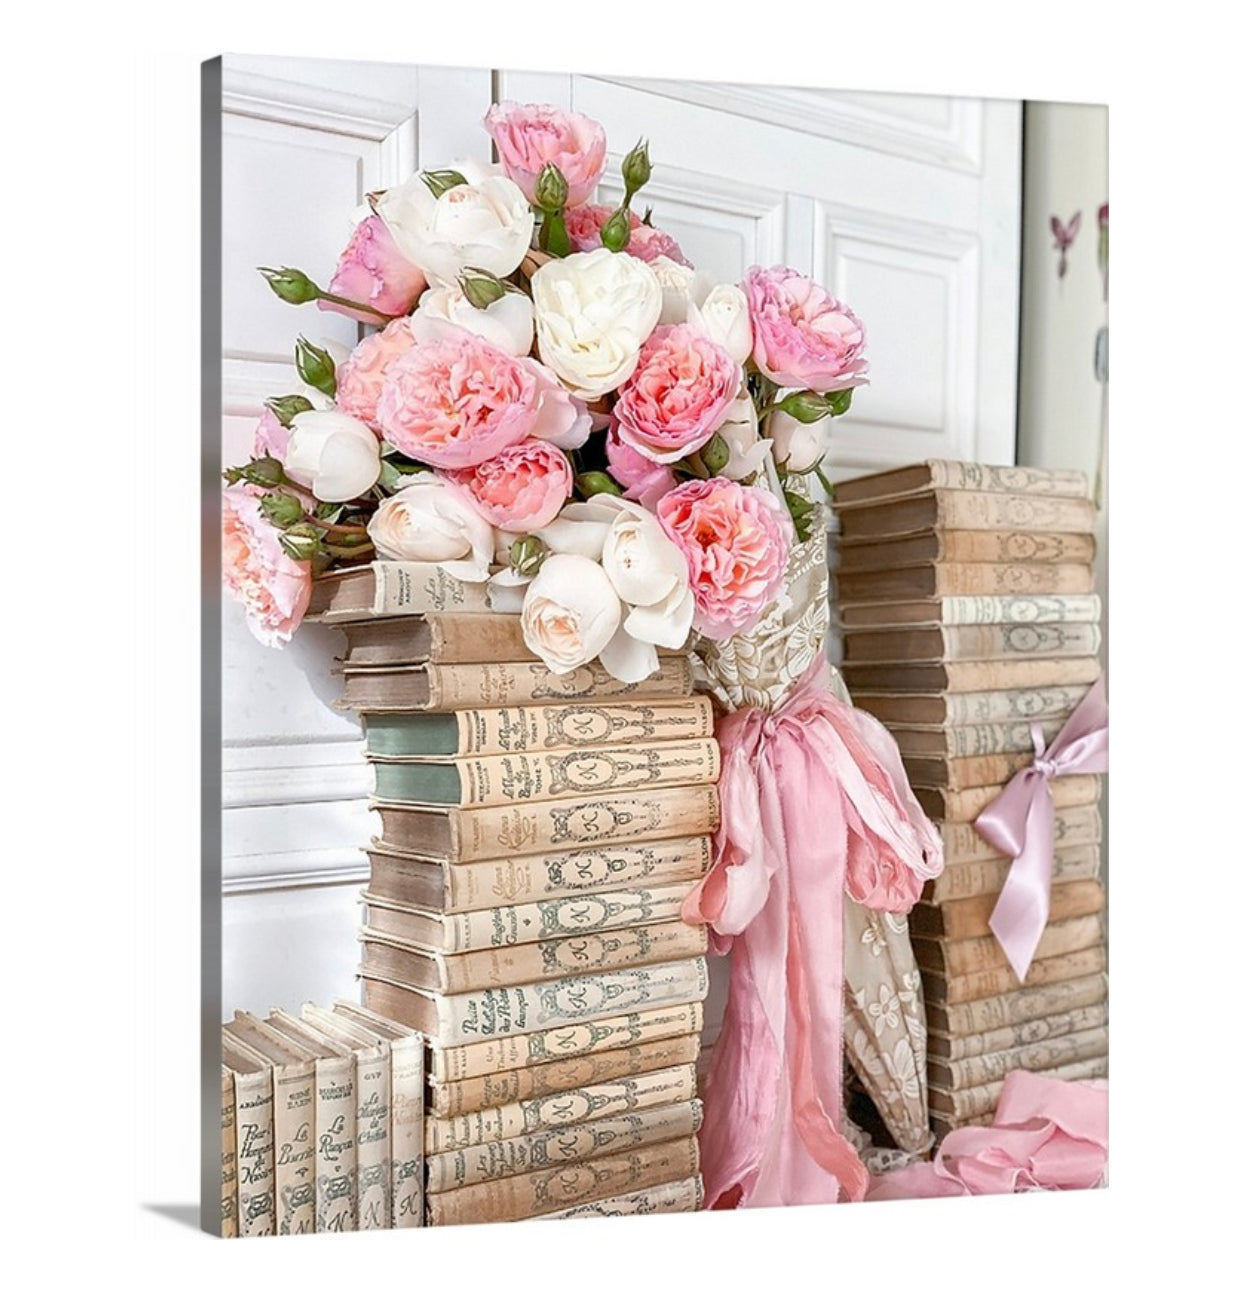 Pink and White Roses with Cream Books Gallery Wrapped Canvas